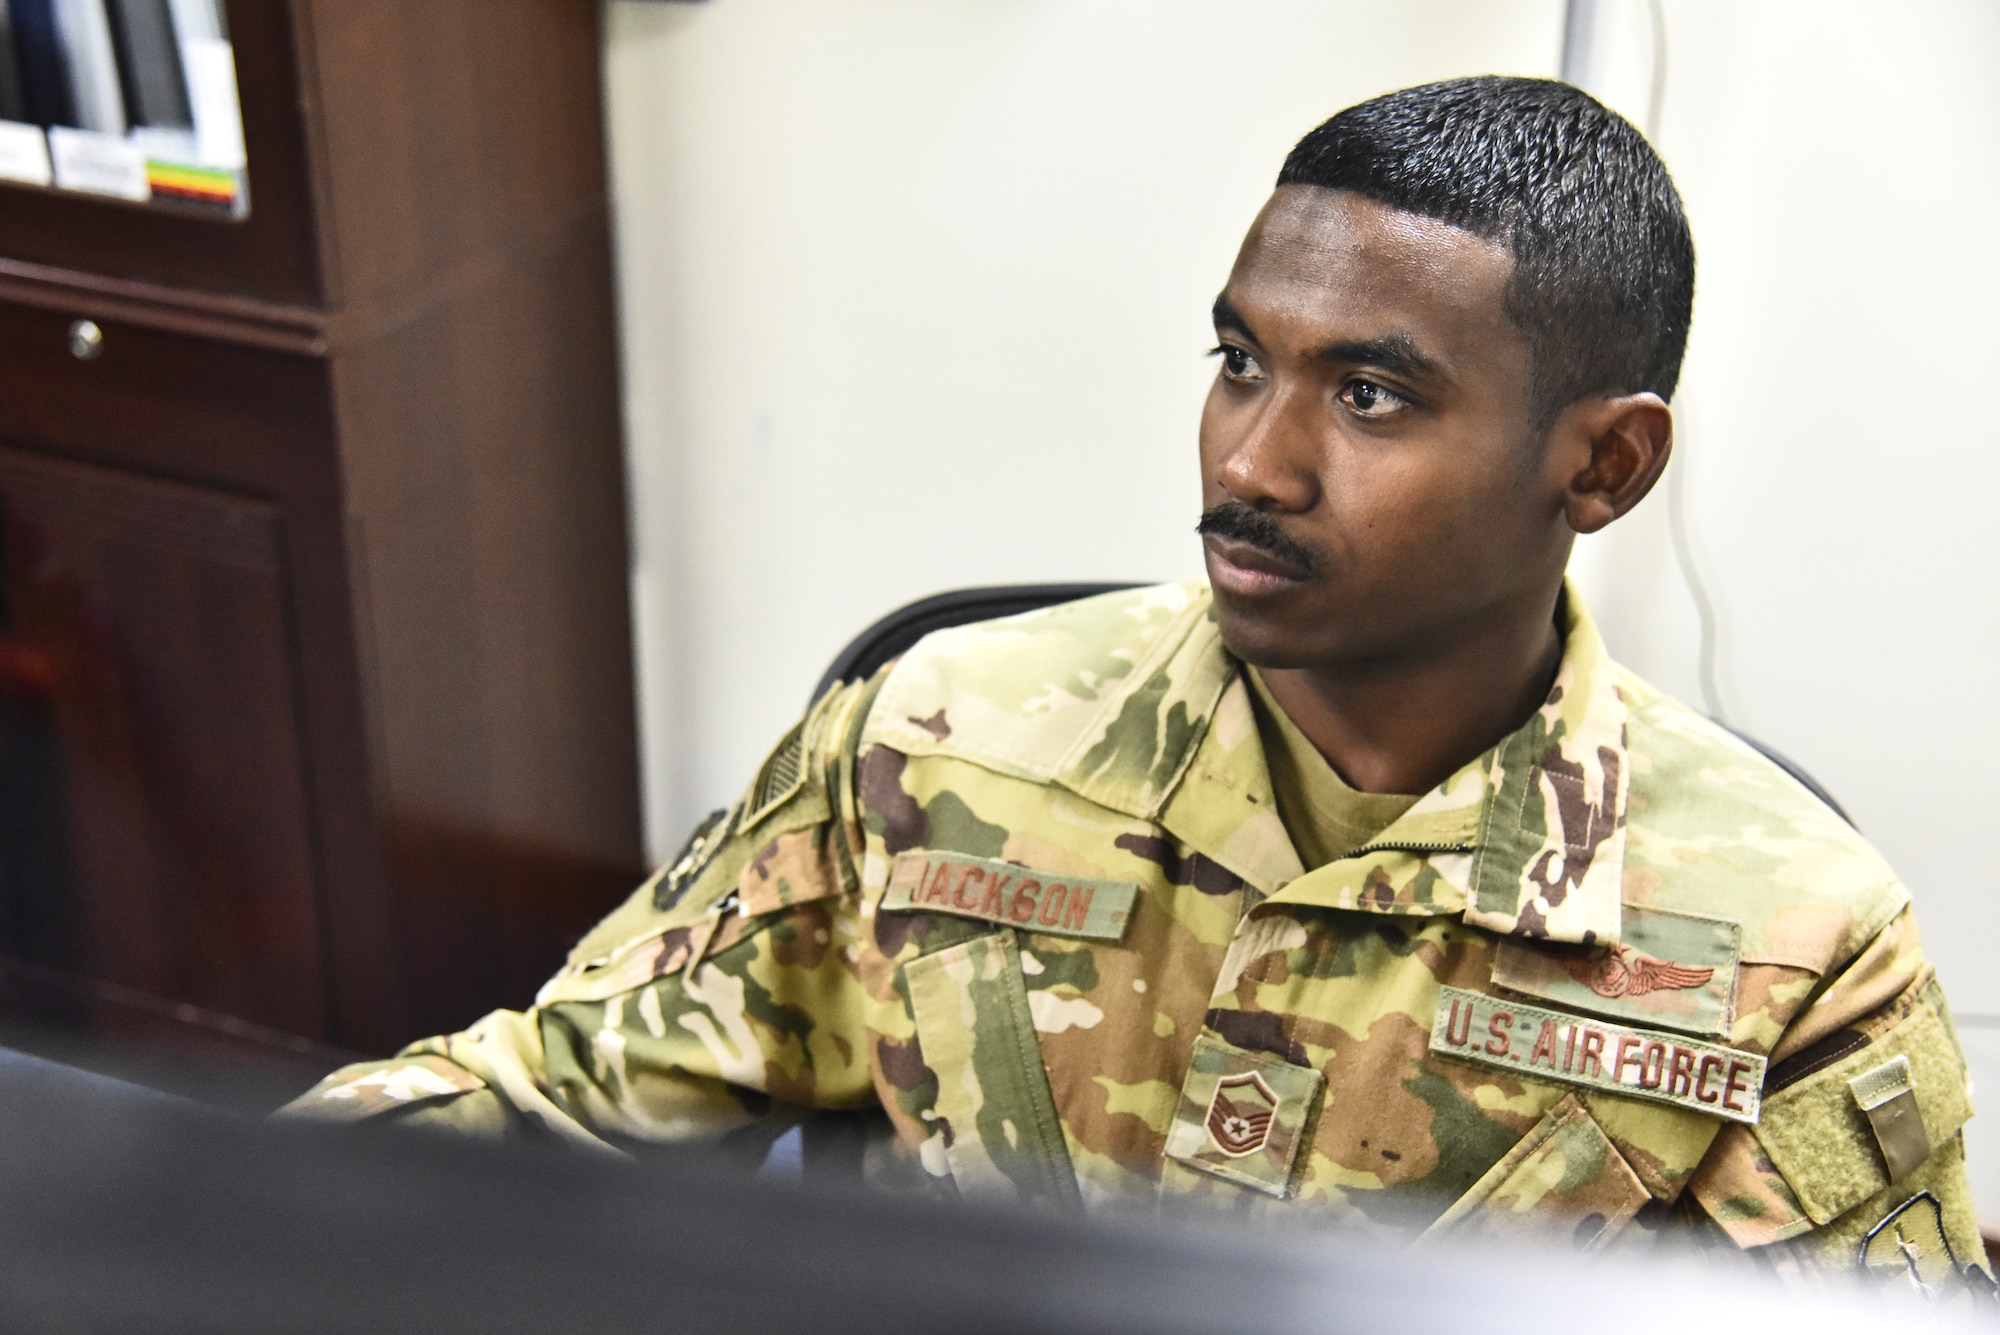 Master Sgt. William Jackson, 380th Air Expeditionary Wing Plans and Programs superintendent, reviews programs at Al Dhafra Air Base, United Arab Emirates, Mar. 18, 2019. The 380th AEW Plans and Programs shop, also known as XP, is responsible for developing base’s plans, programs and policies; coordinating programming actions to resolve issues; and constantly analyzing the effectiveness of these programs. (U.S. Air Force photo by Senior Airman Mya M. Crosby)